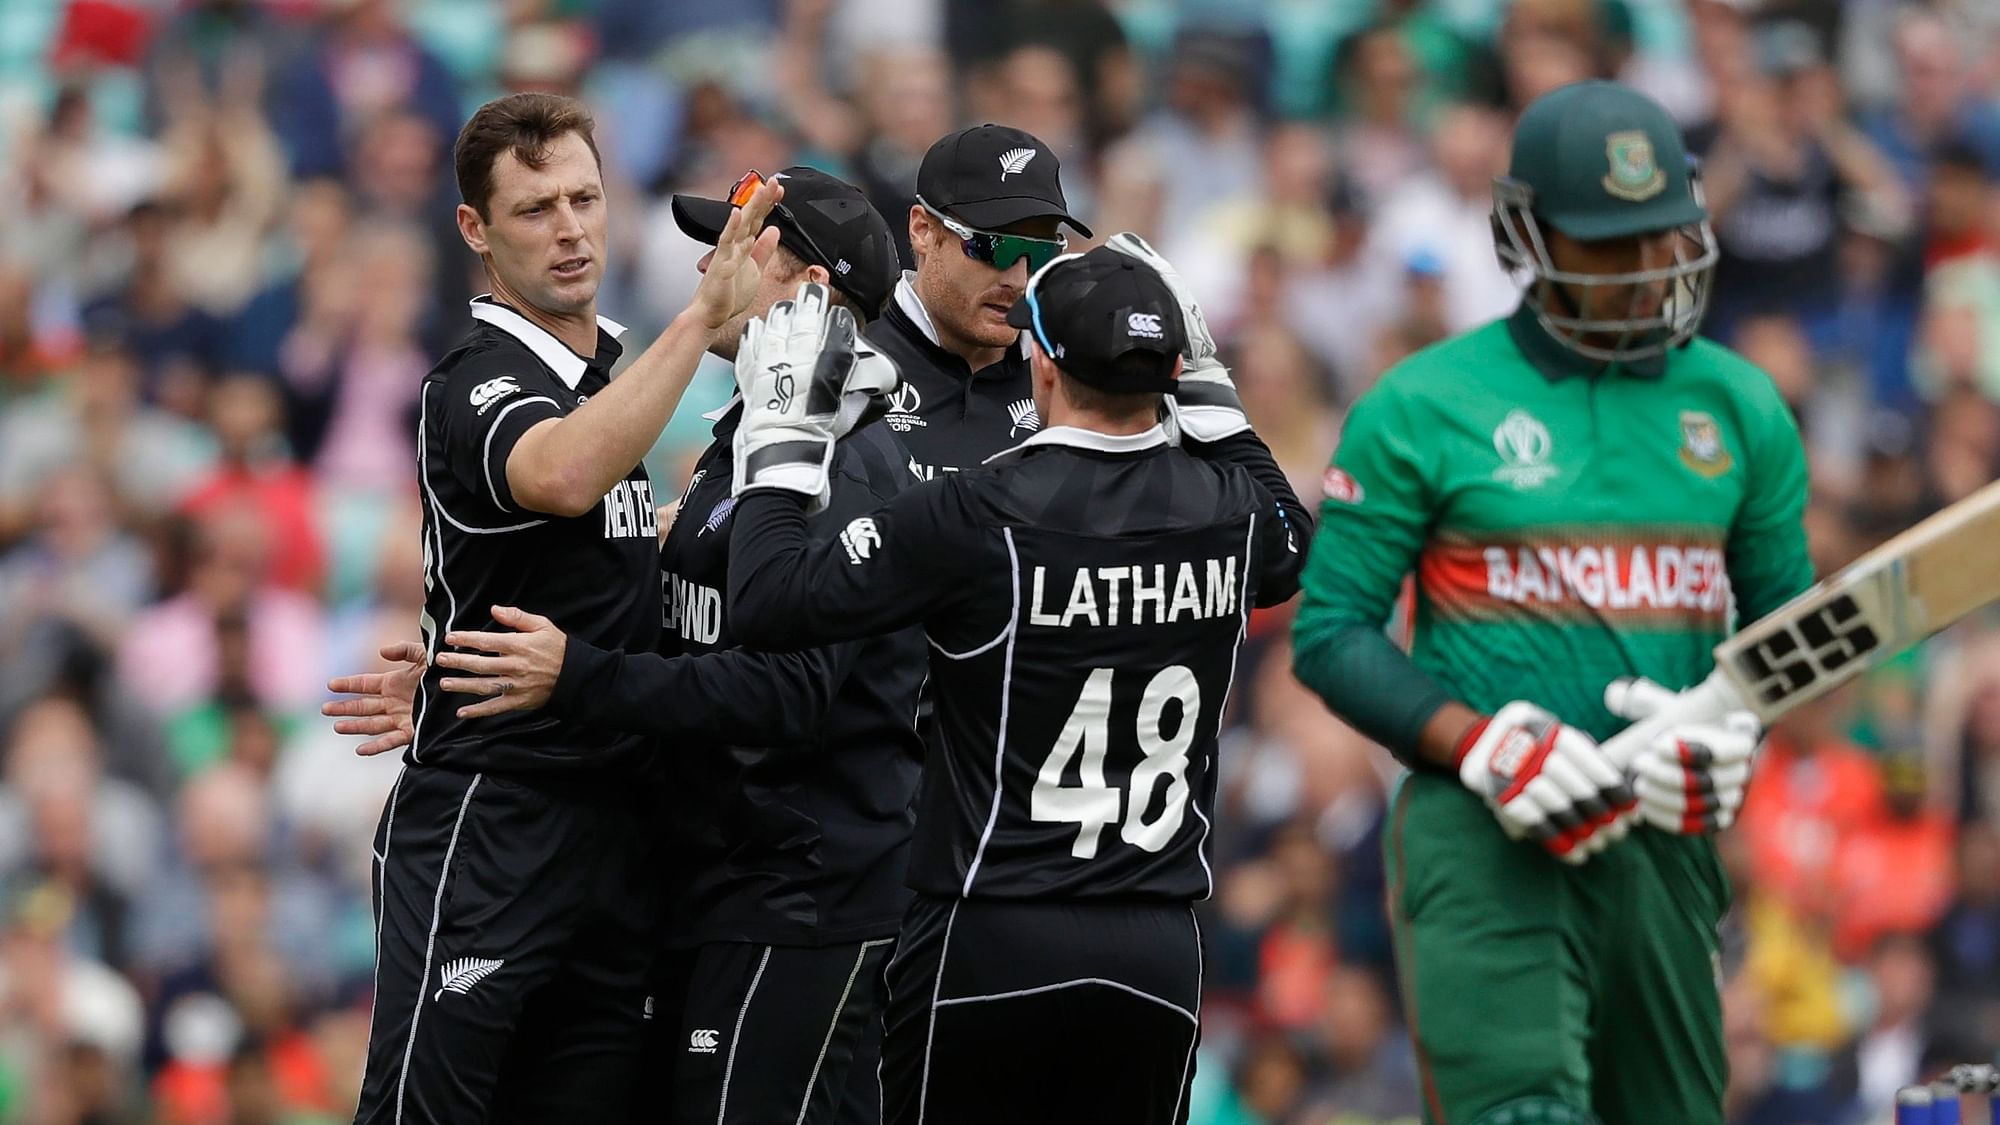 New Zealand beat Bangladesh by 2 wickets in the 2019 ICC World Cup.